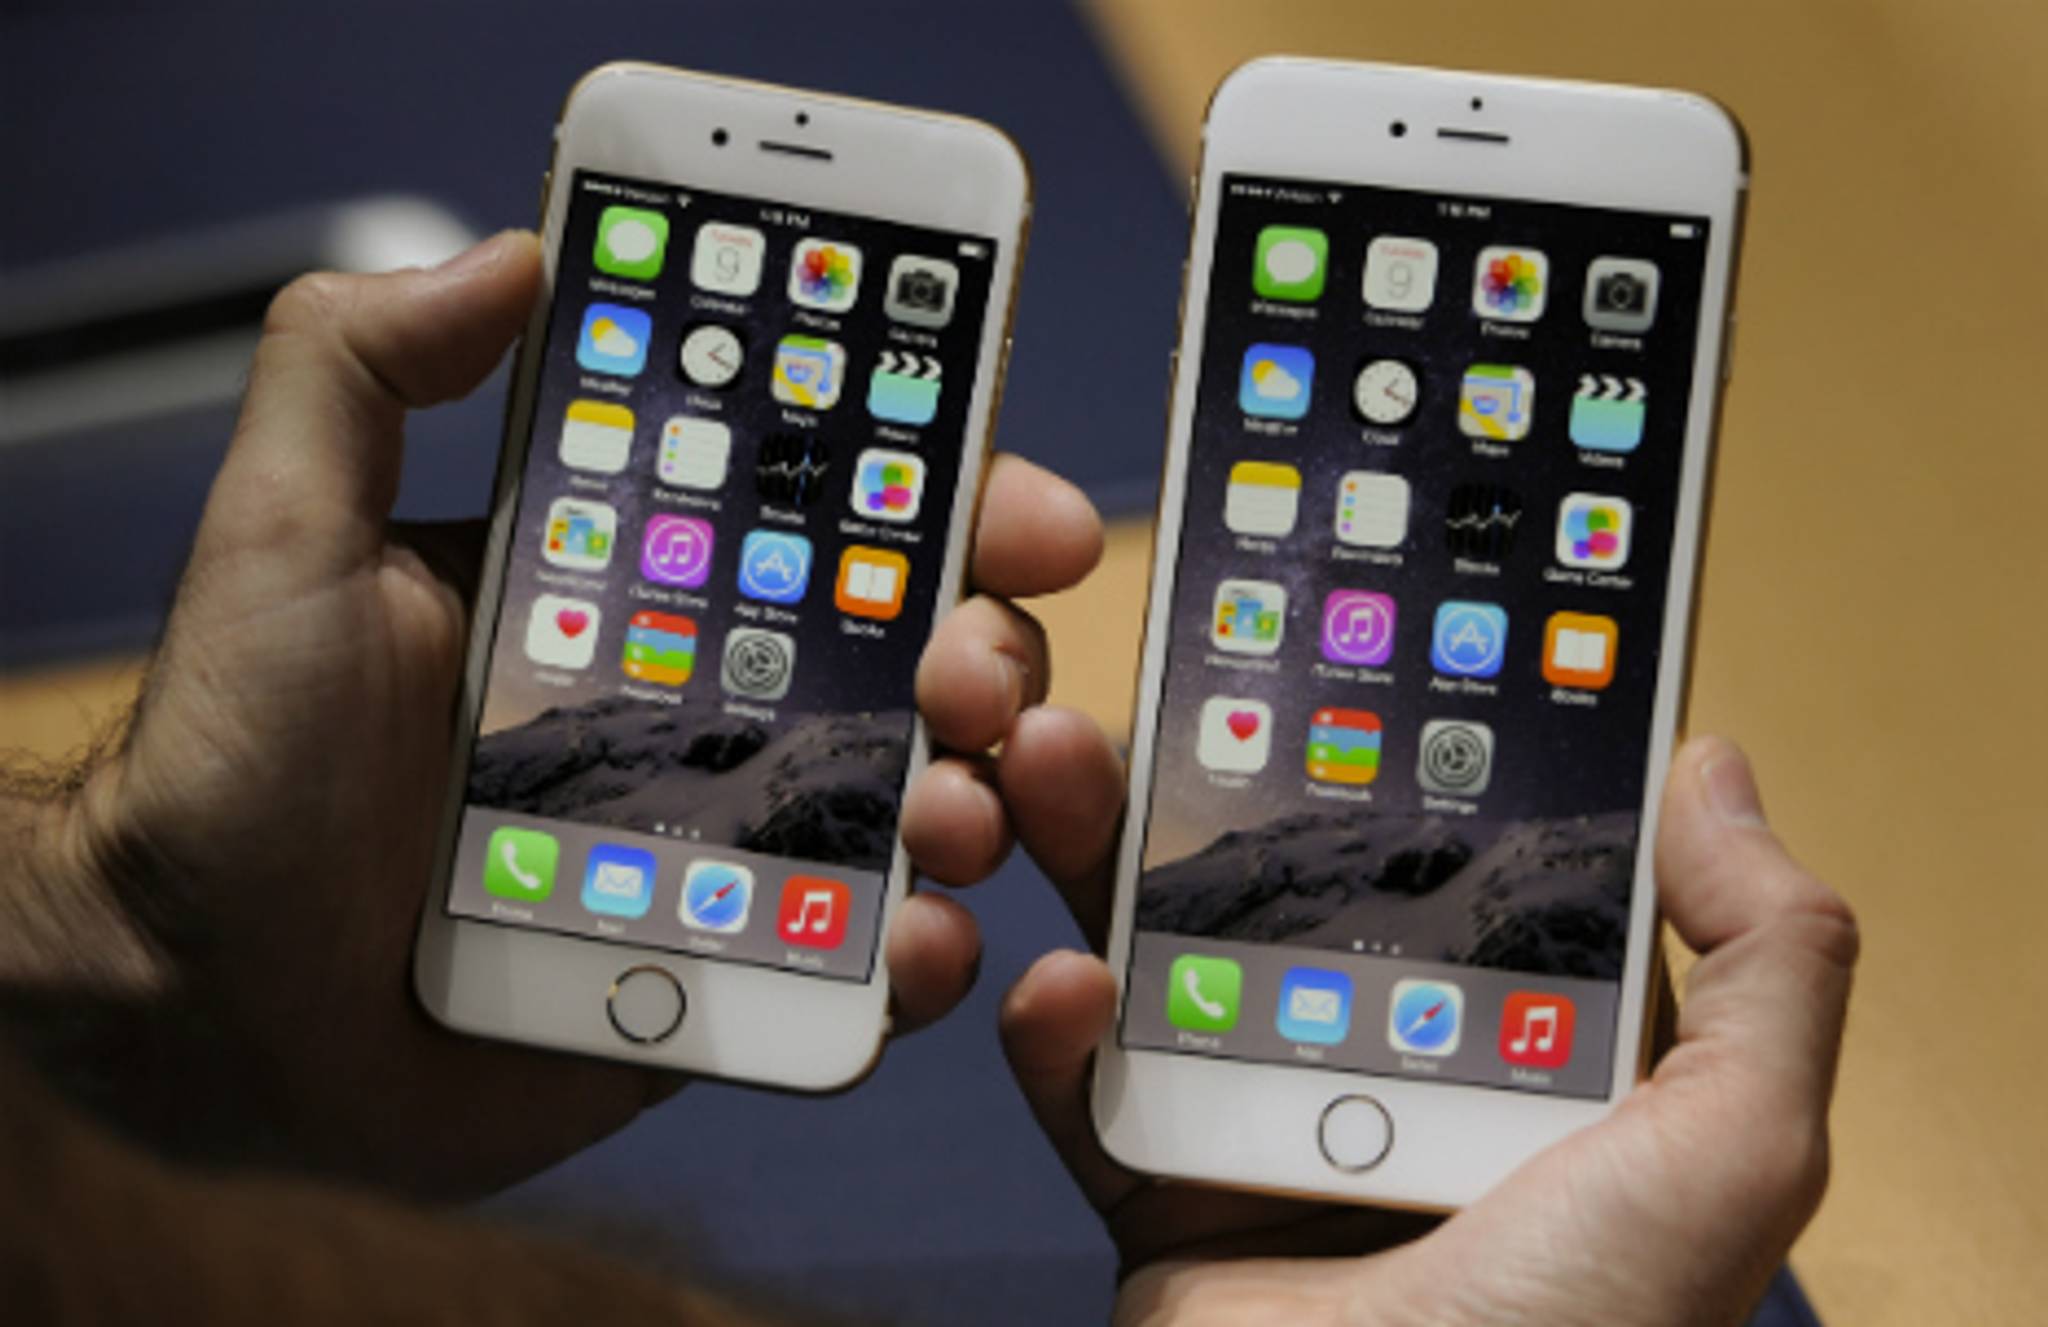 iPhone 6 Plus targets the phablet category